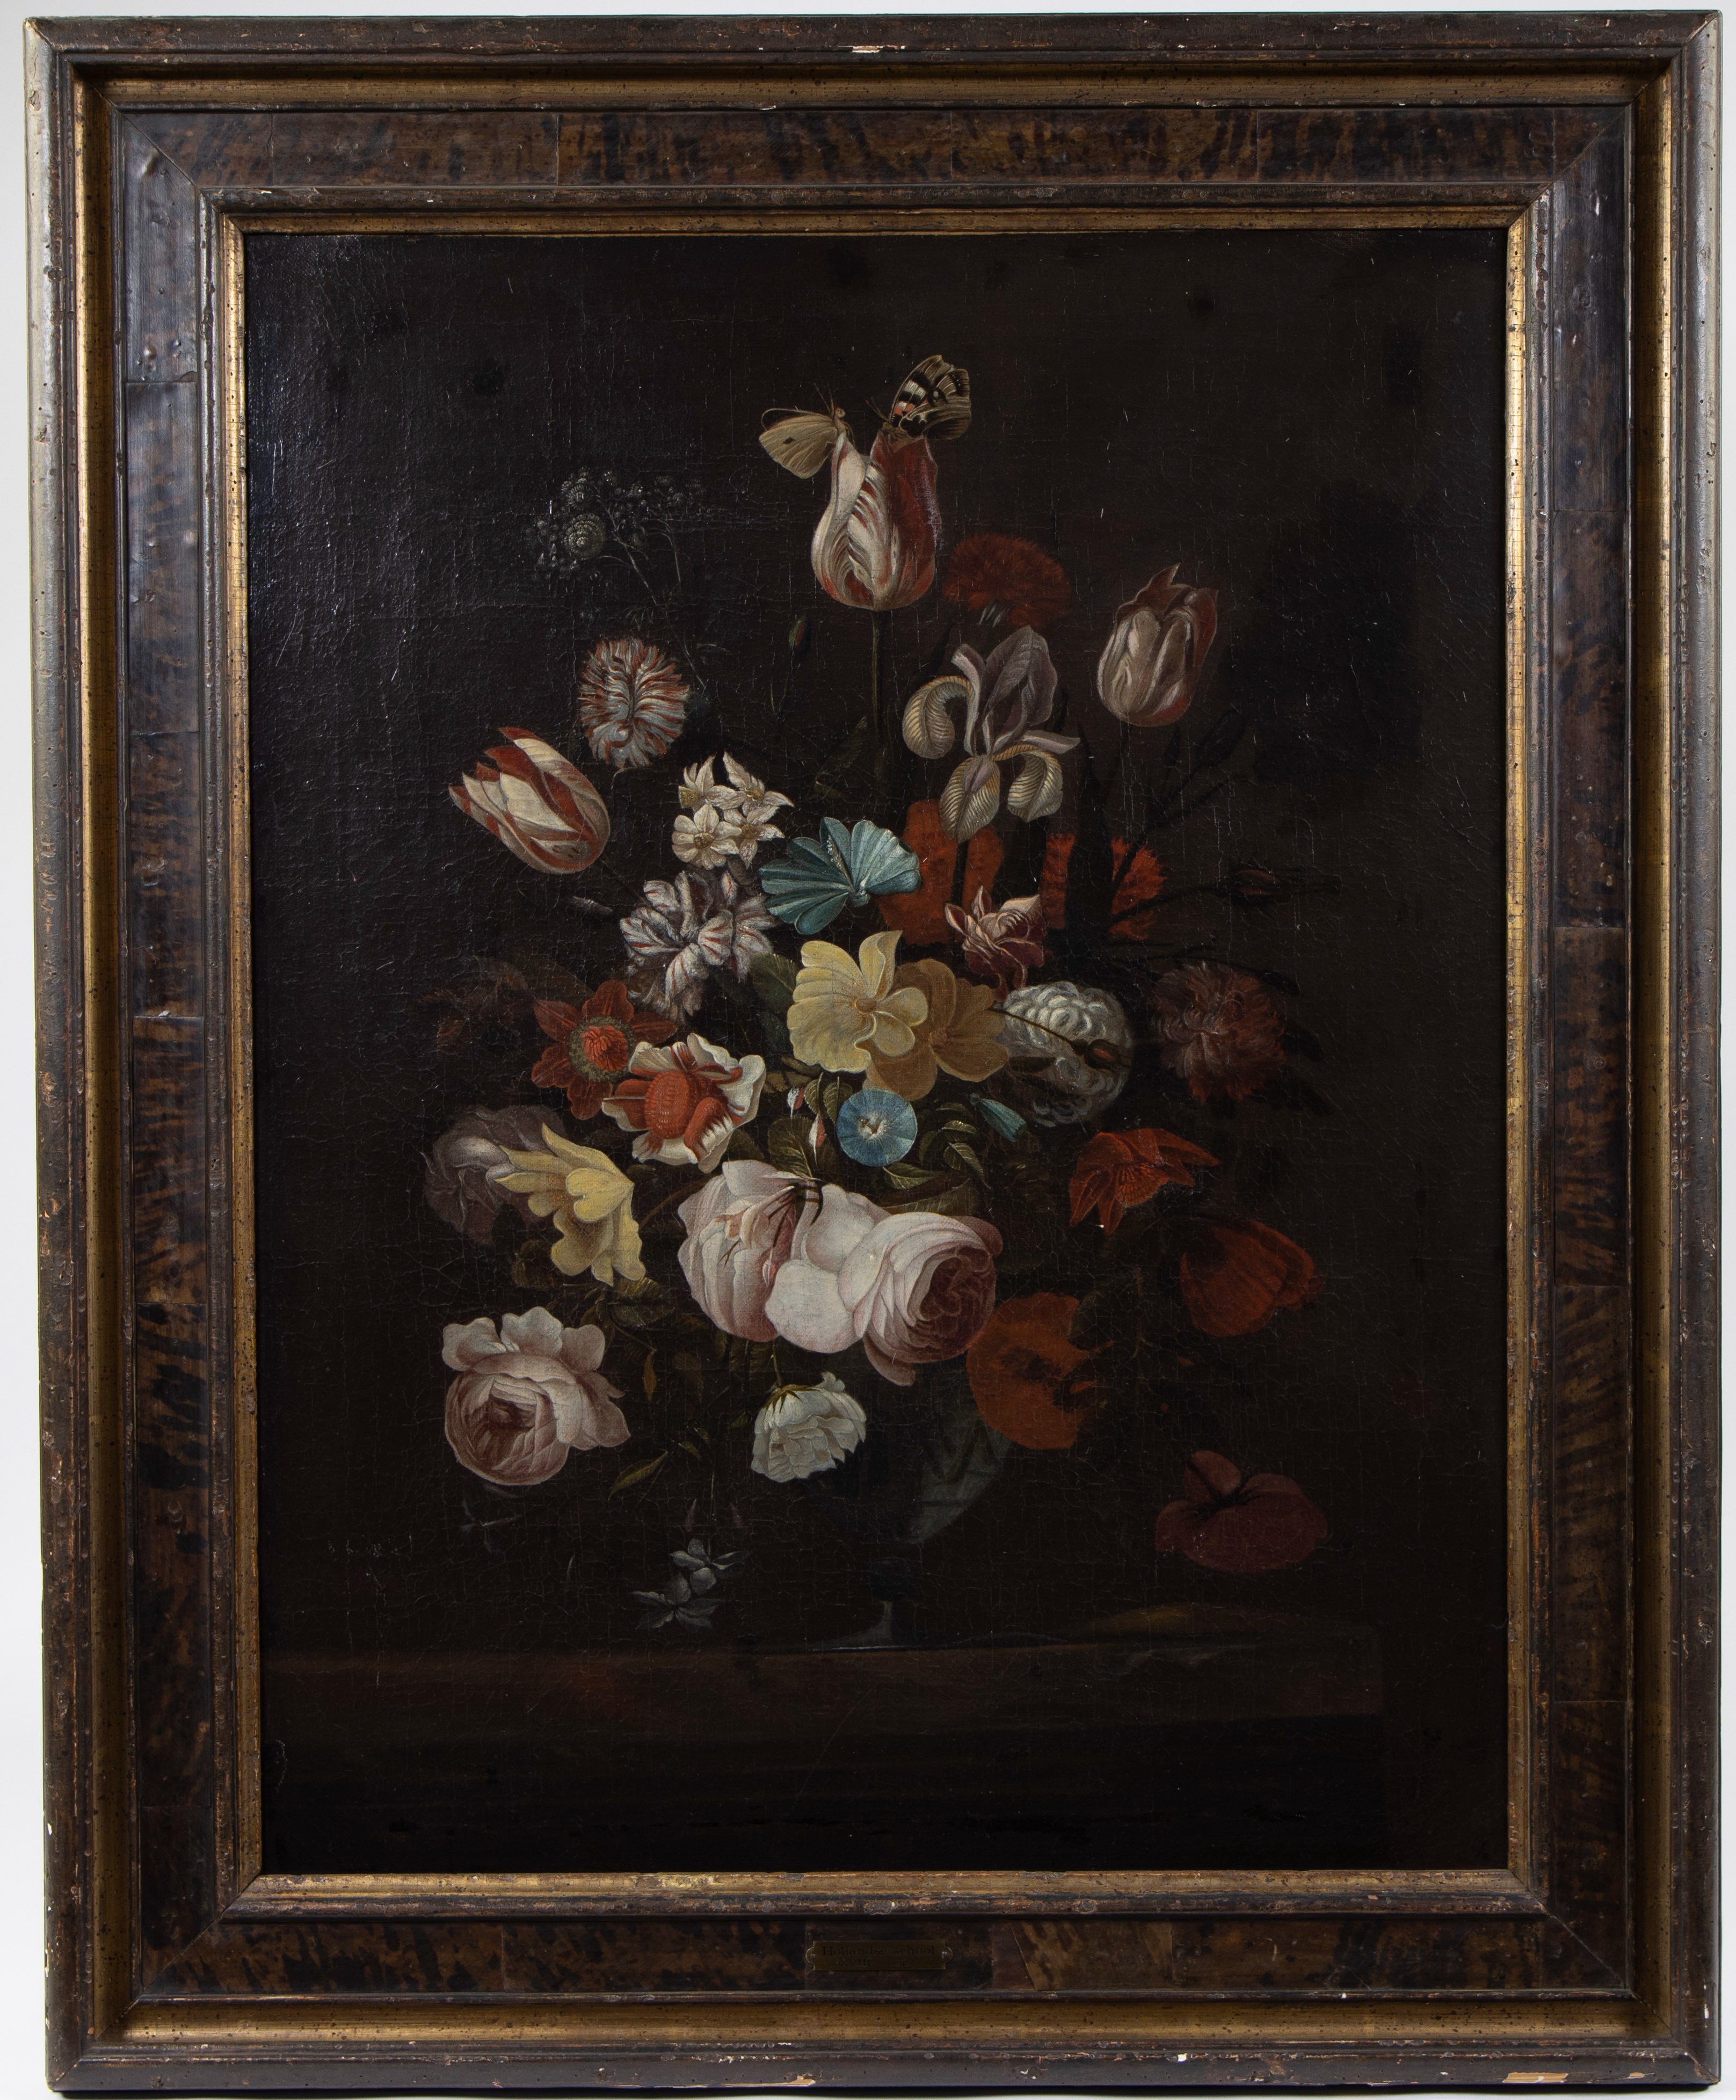 Dutch school 18th century oil on canvas Still life with flowers - Image 2 of 3